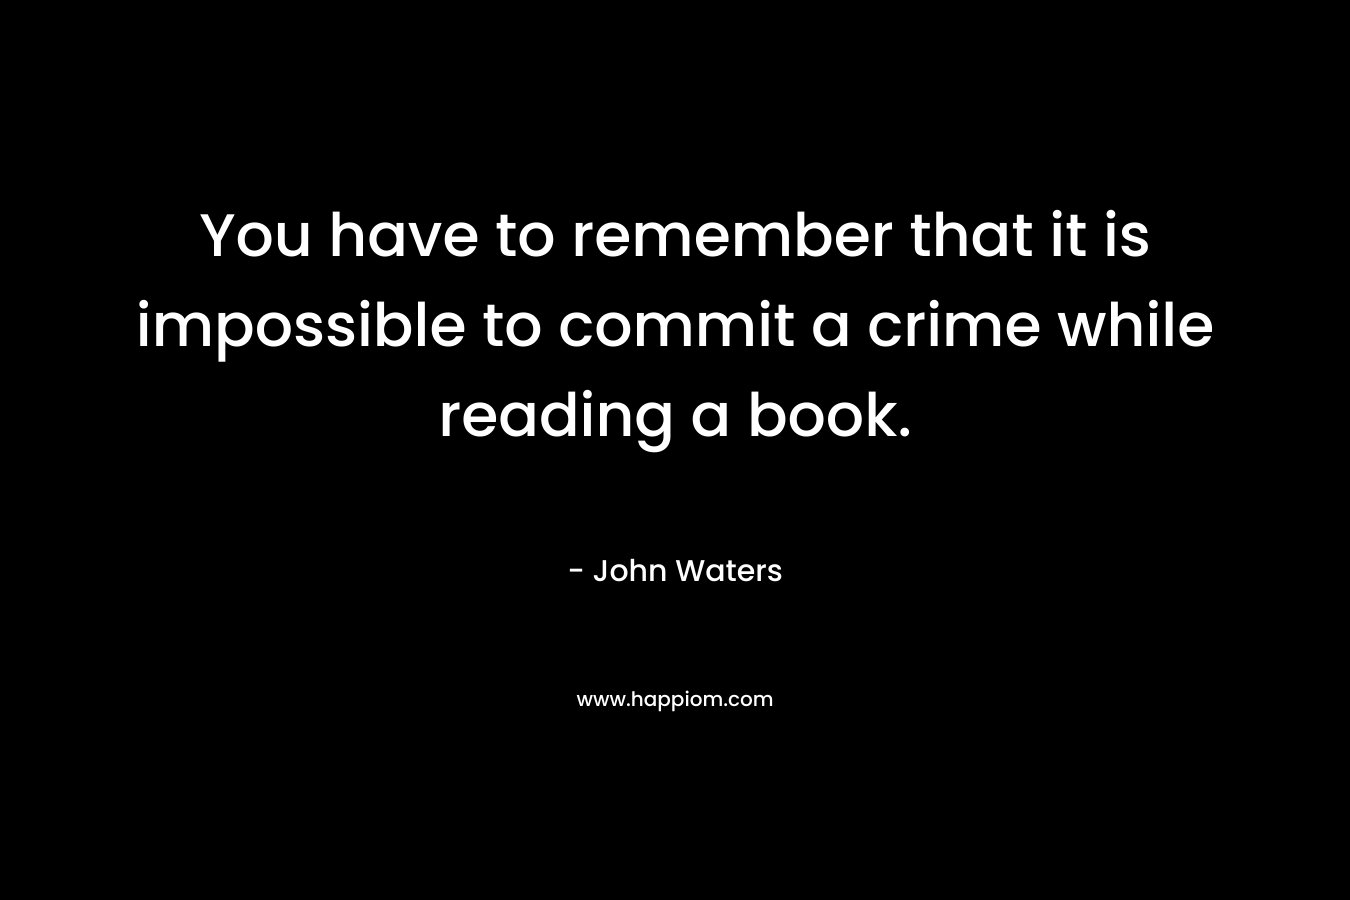 You have to remember that it is impossible to commit a crime while reading a book. – John Waters